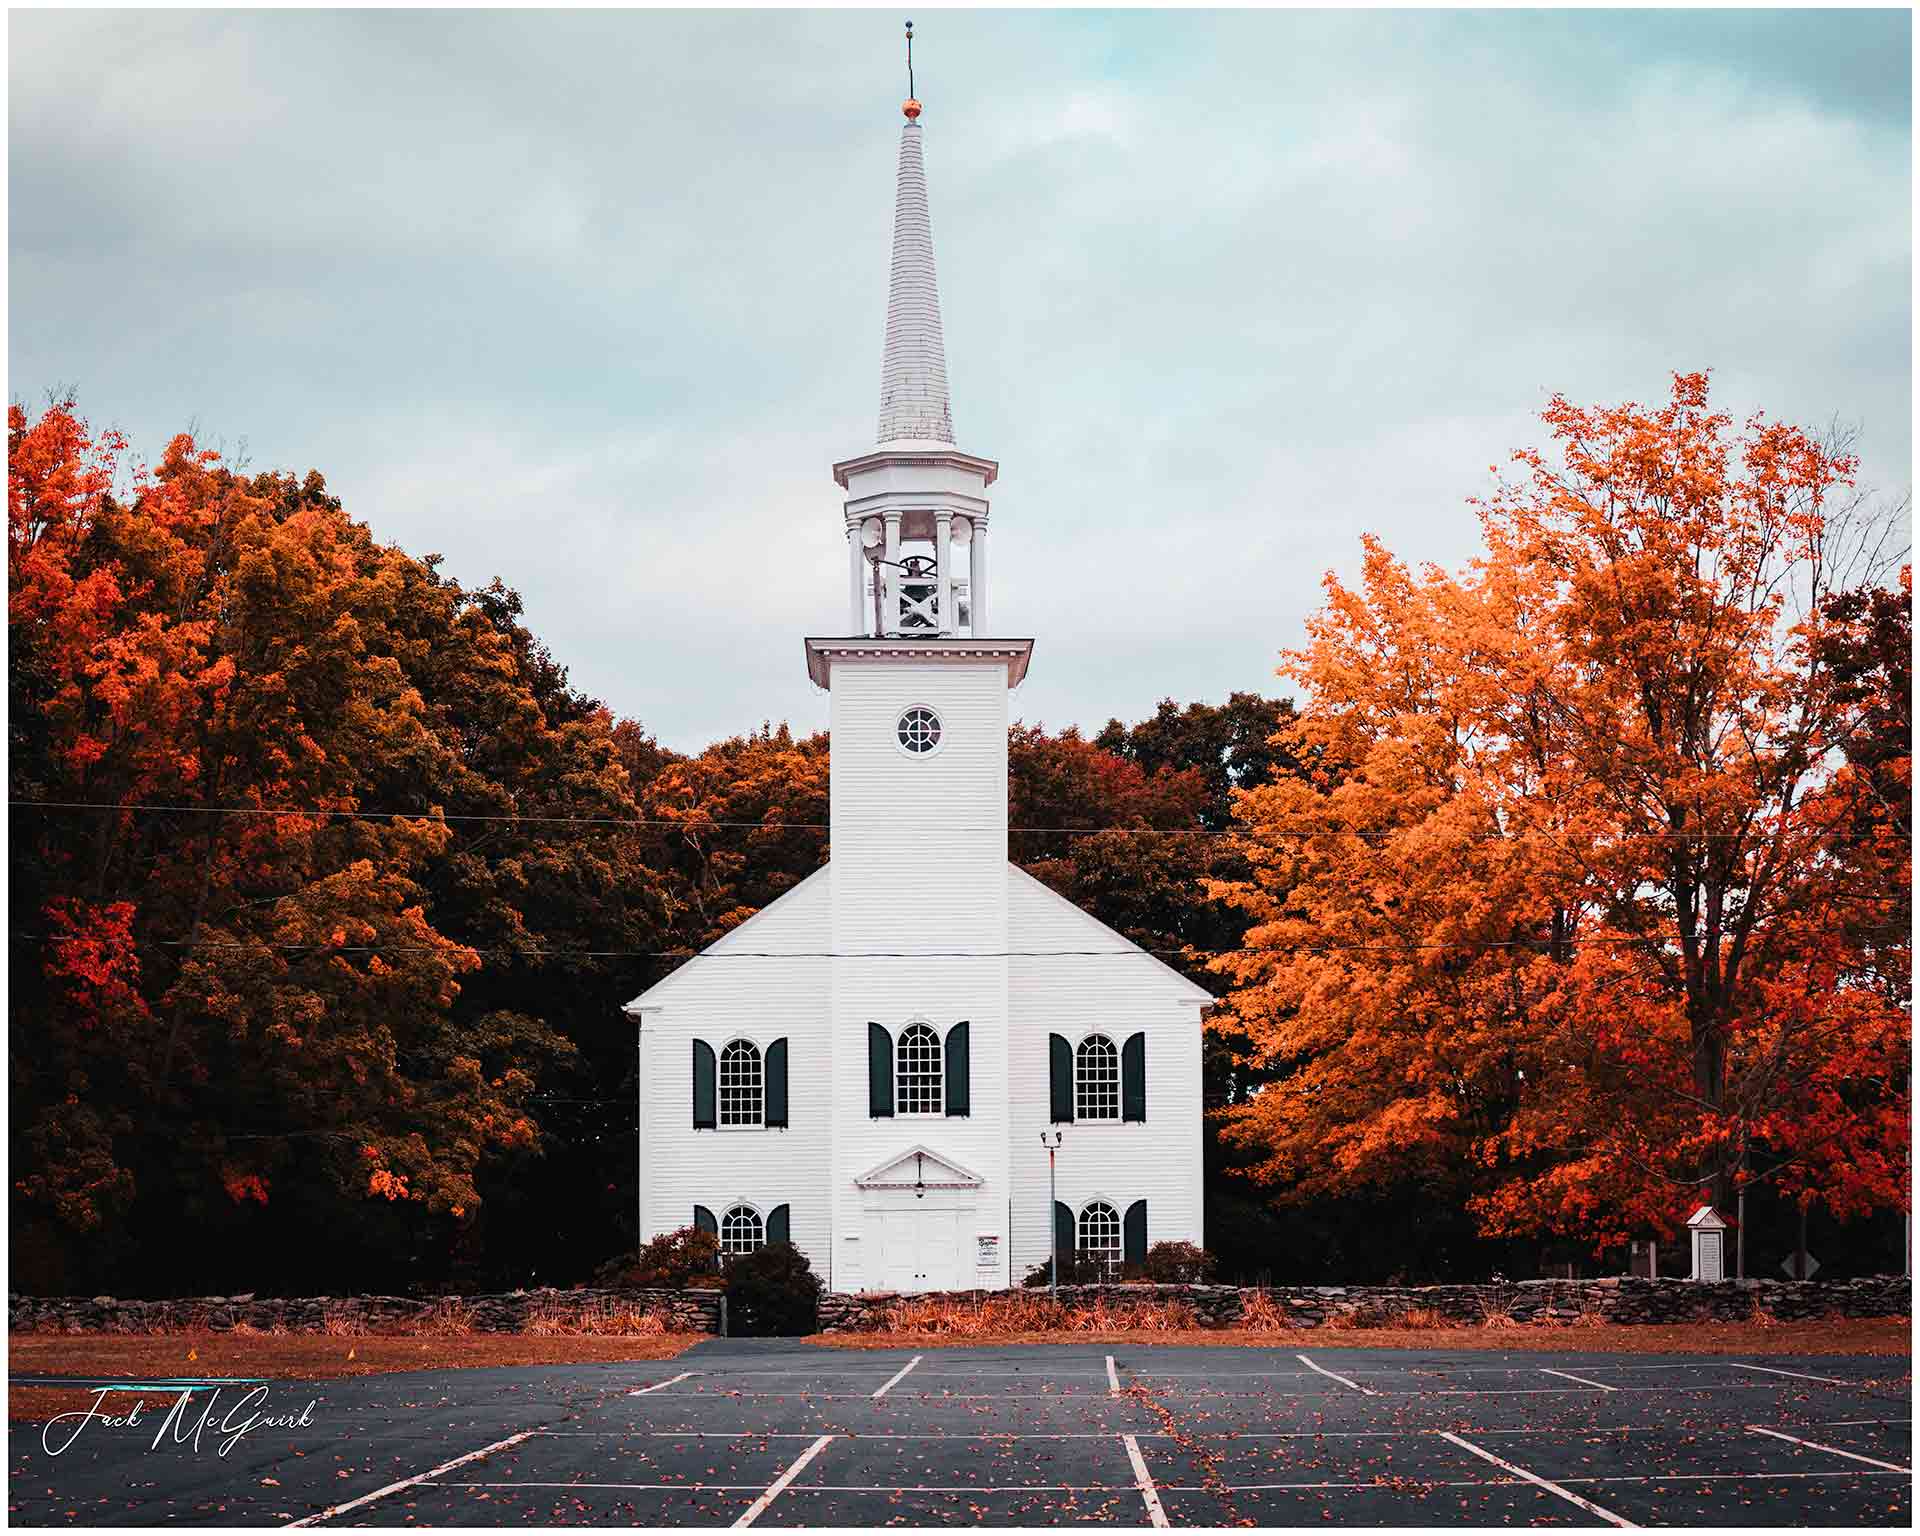 A photo of a church surrounded by autumn leaves by Jack McGuirk '21